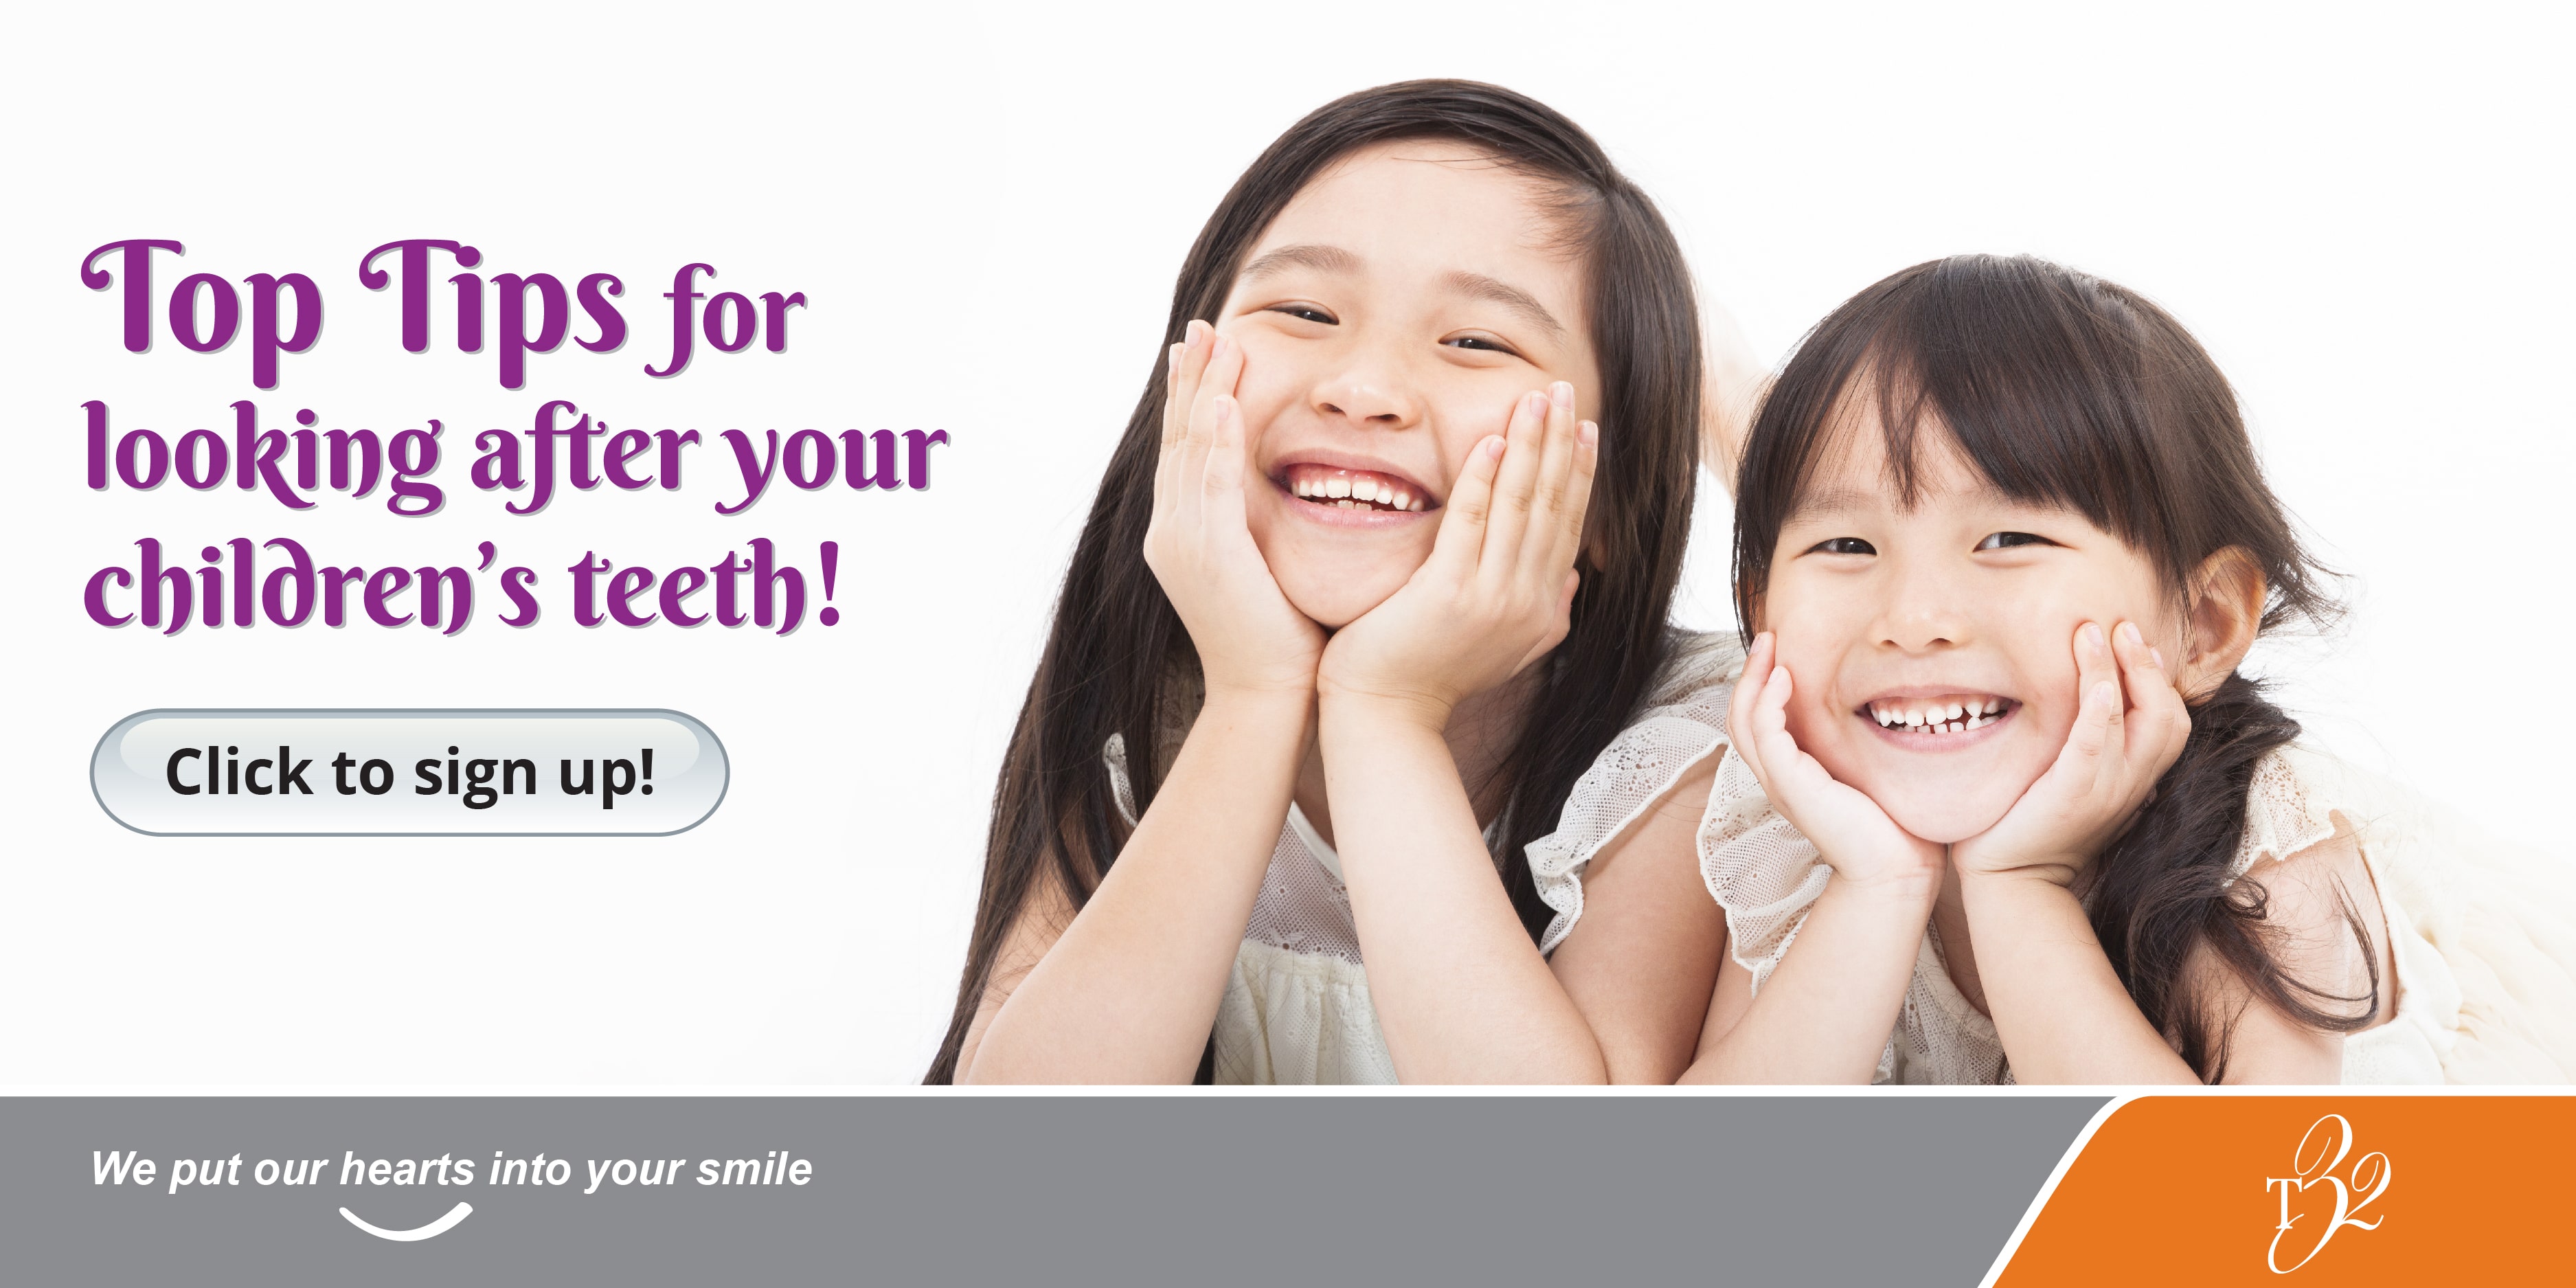 Featured Image for [JW NLB] Top Tips for Looking after your Children’s’ Teeth